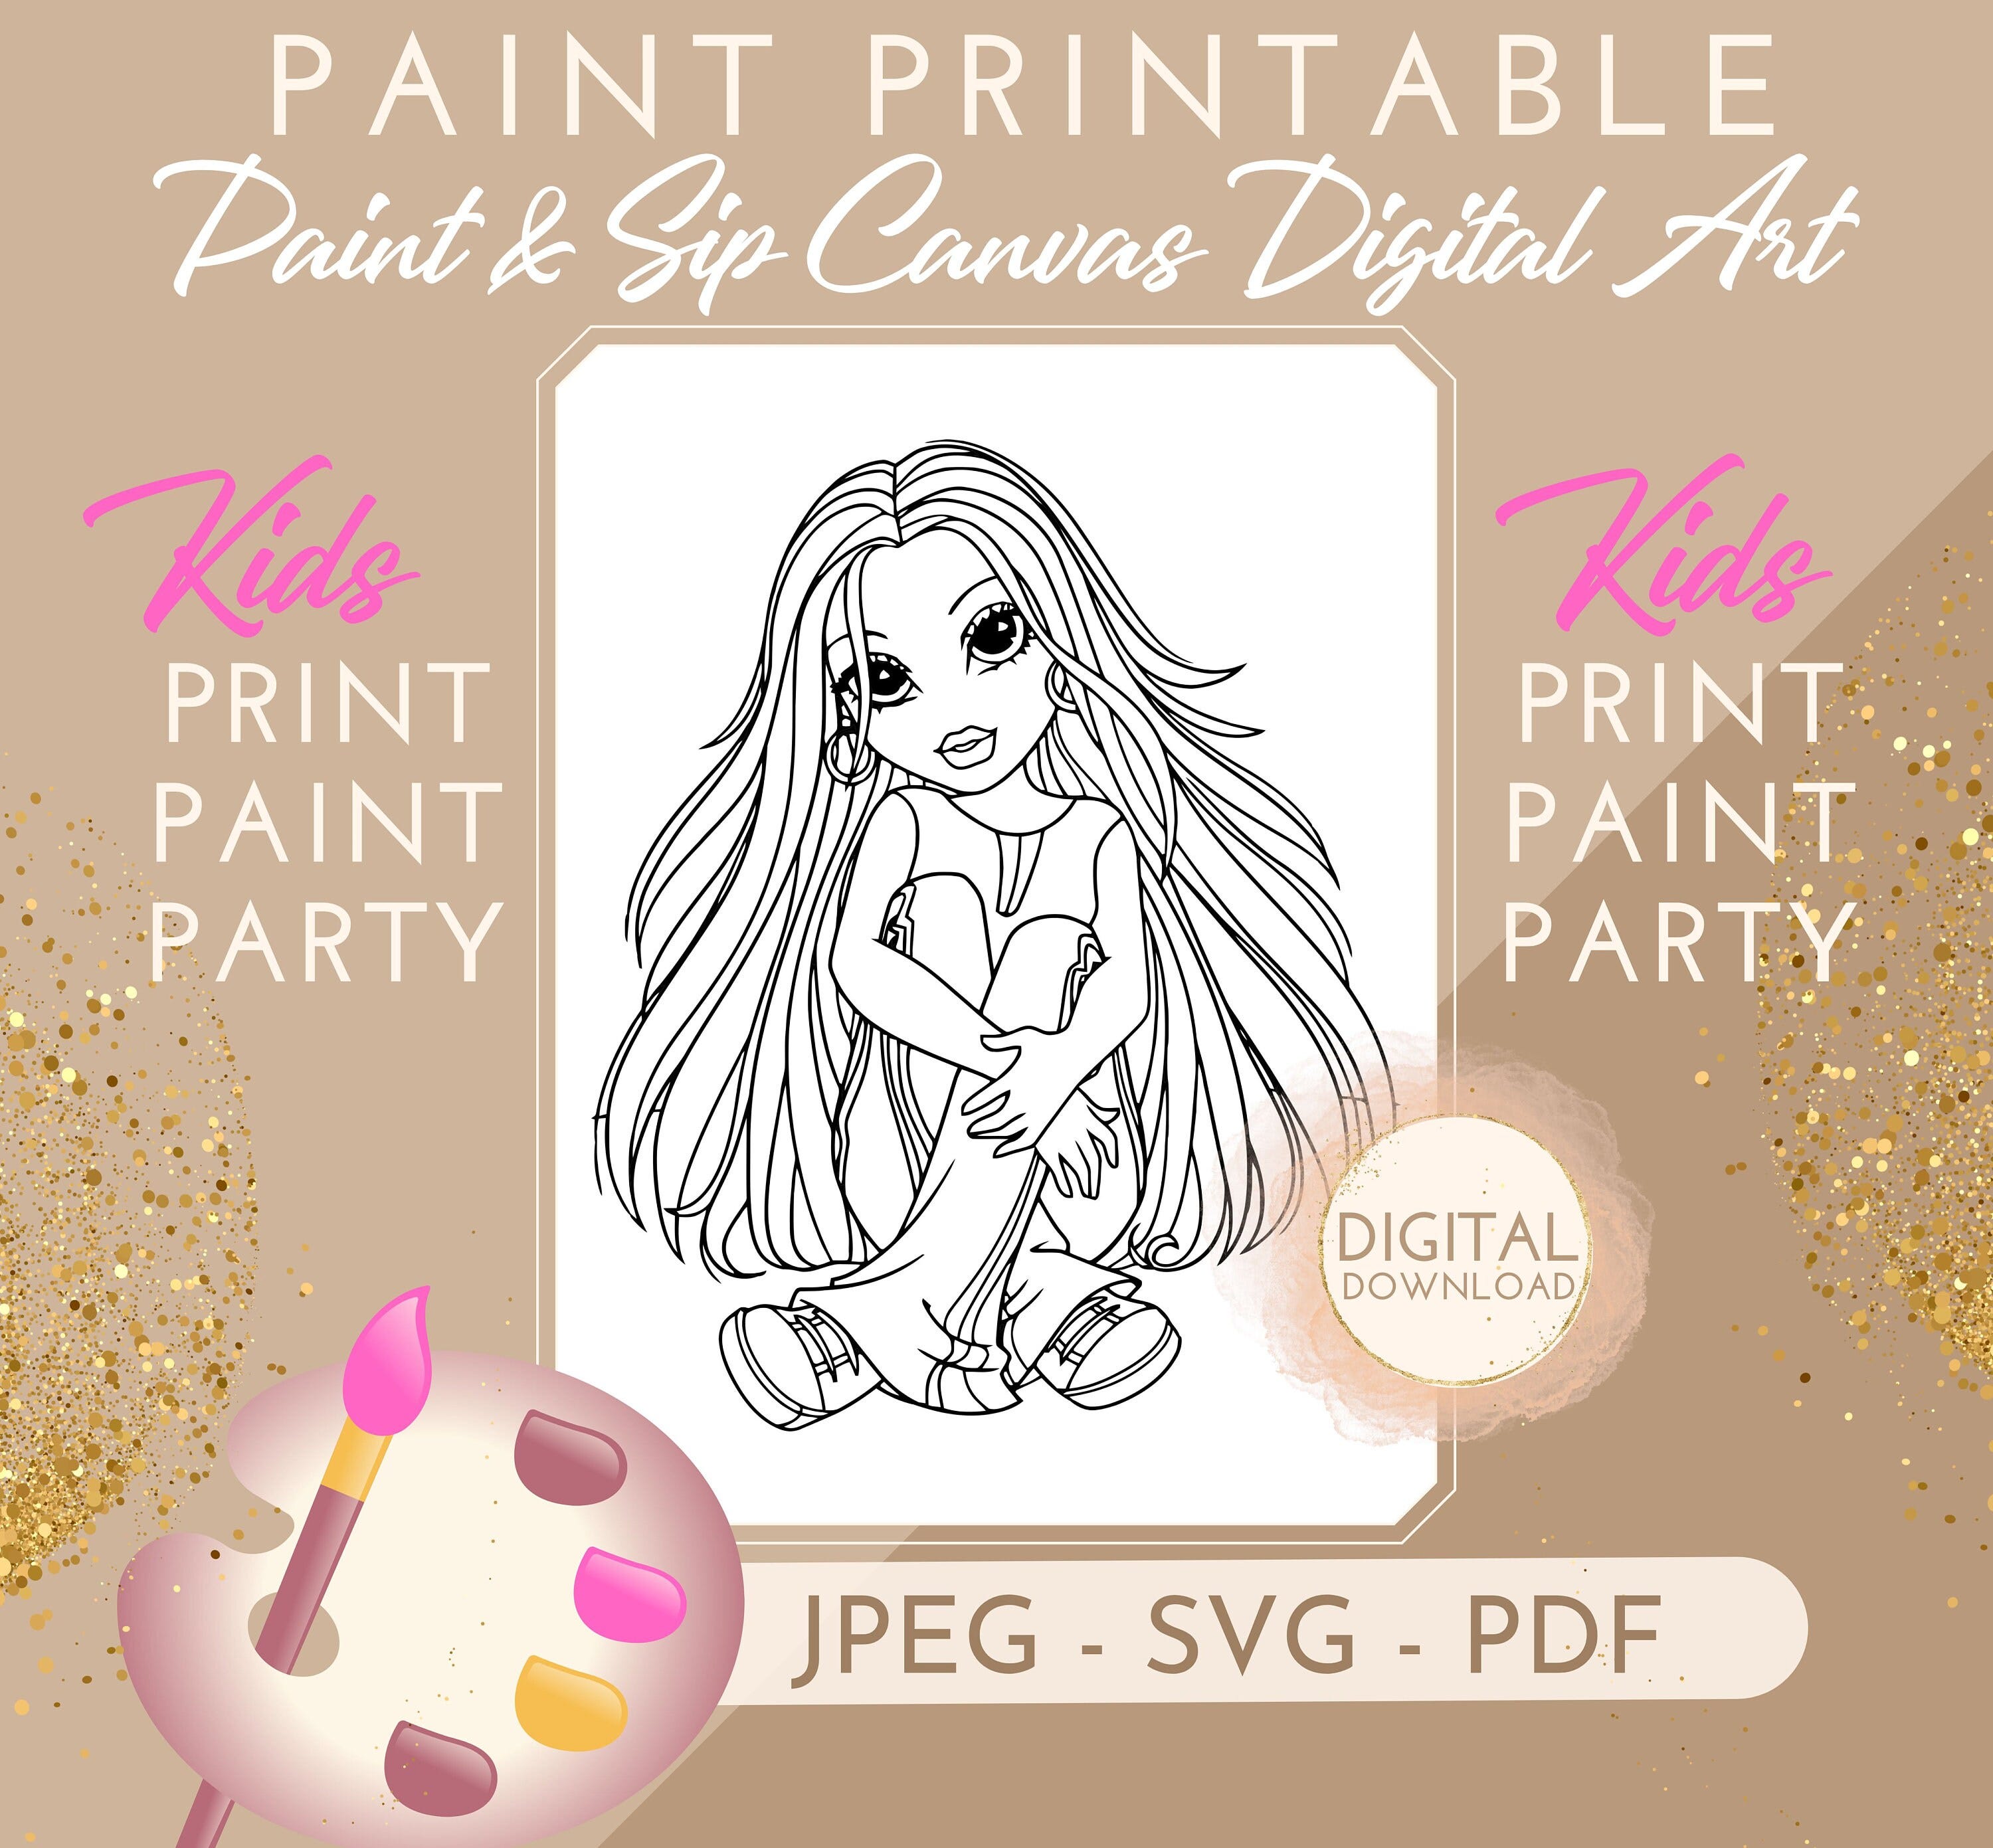 Kids Paint and Sip - Girl Sitting Pre Drawn Outline DIY Paint and Sip Party file for png jpeg canvas design sketch digital download